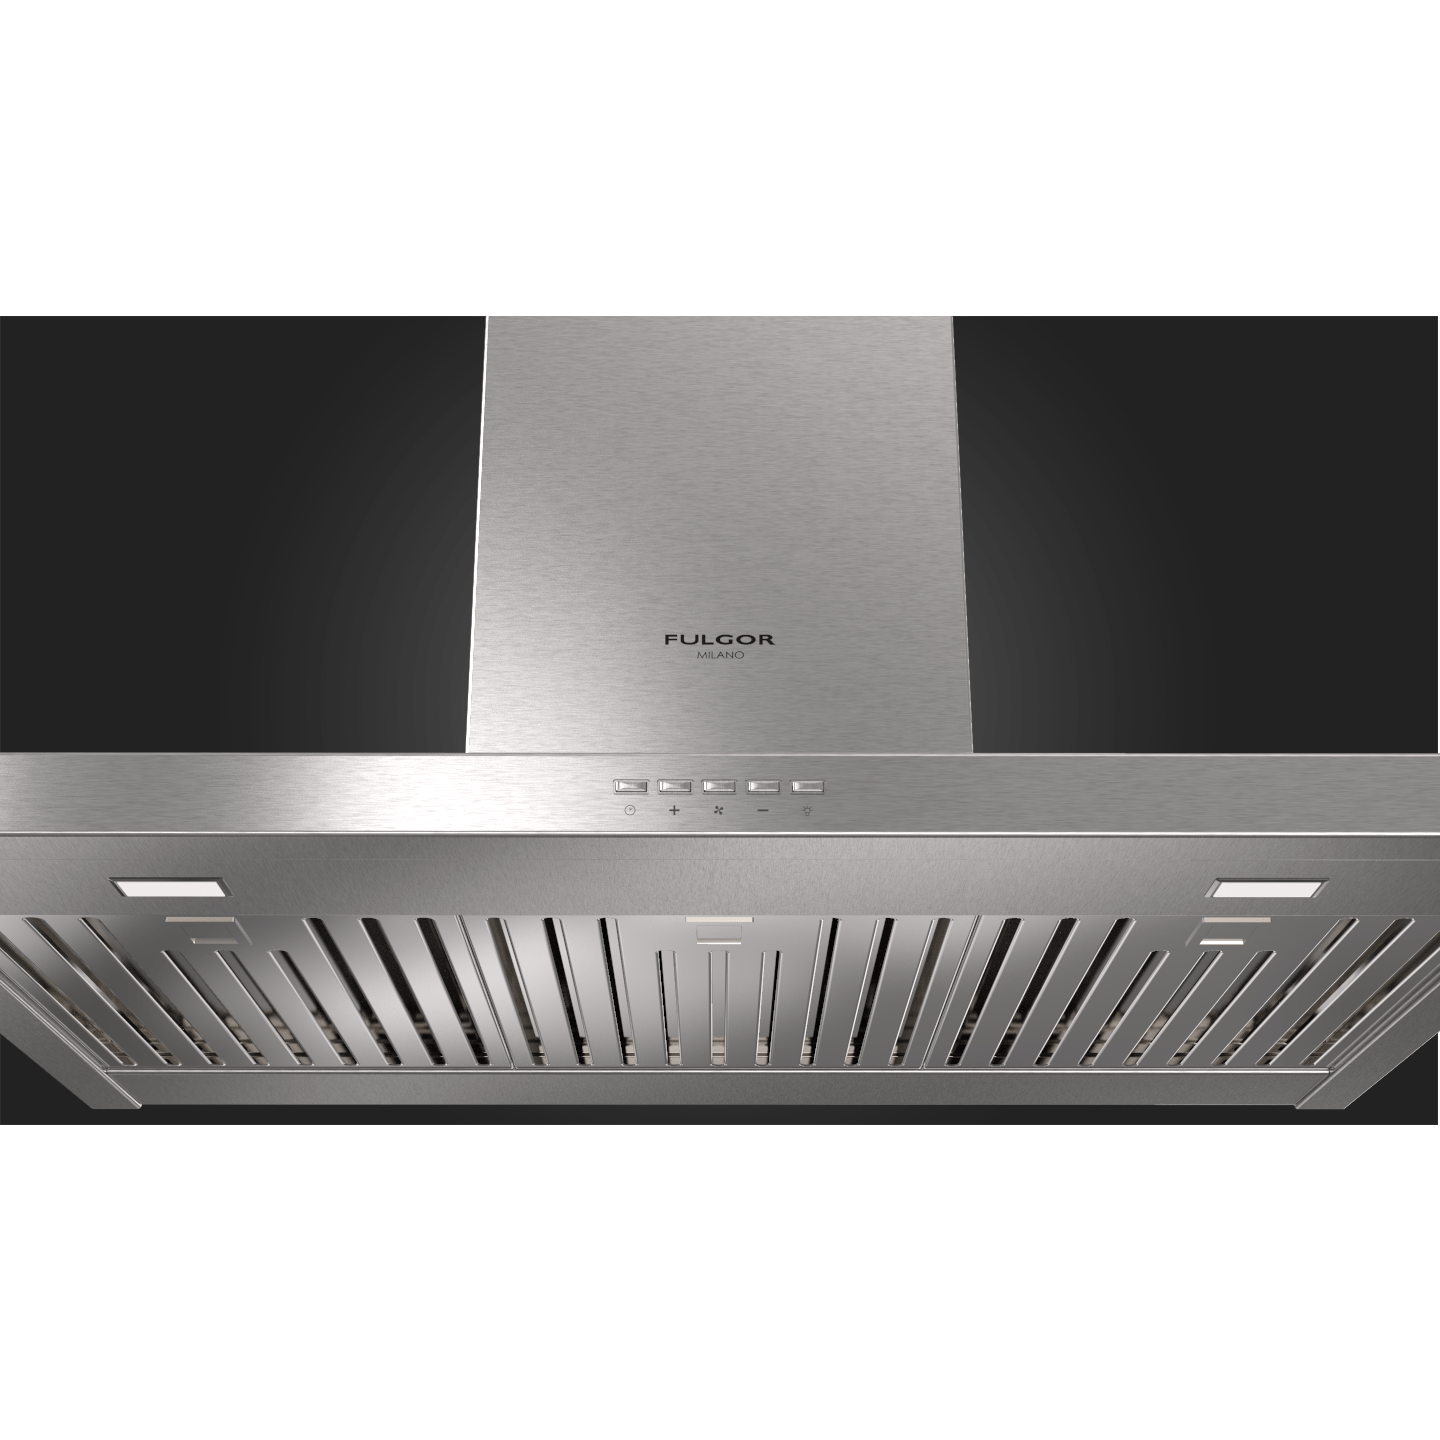 Fulgor Milano 30" Chimney Wall Mount Range Hood with 4-Speeds, Stainless Steel - F4CW30S1 Hoods F4CW30S1 Luxury Appliances Direct